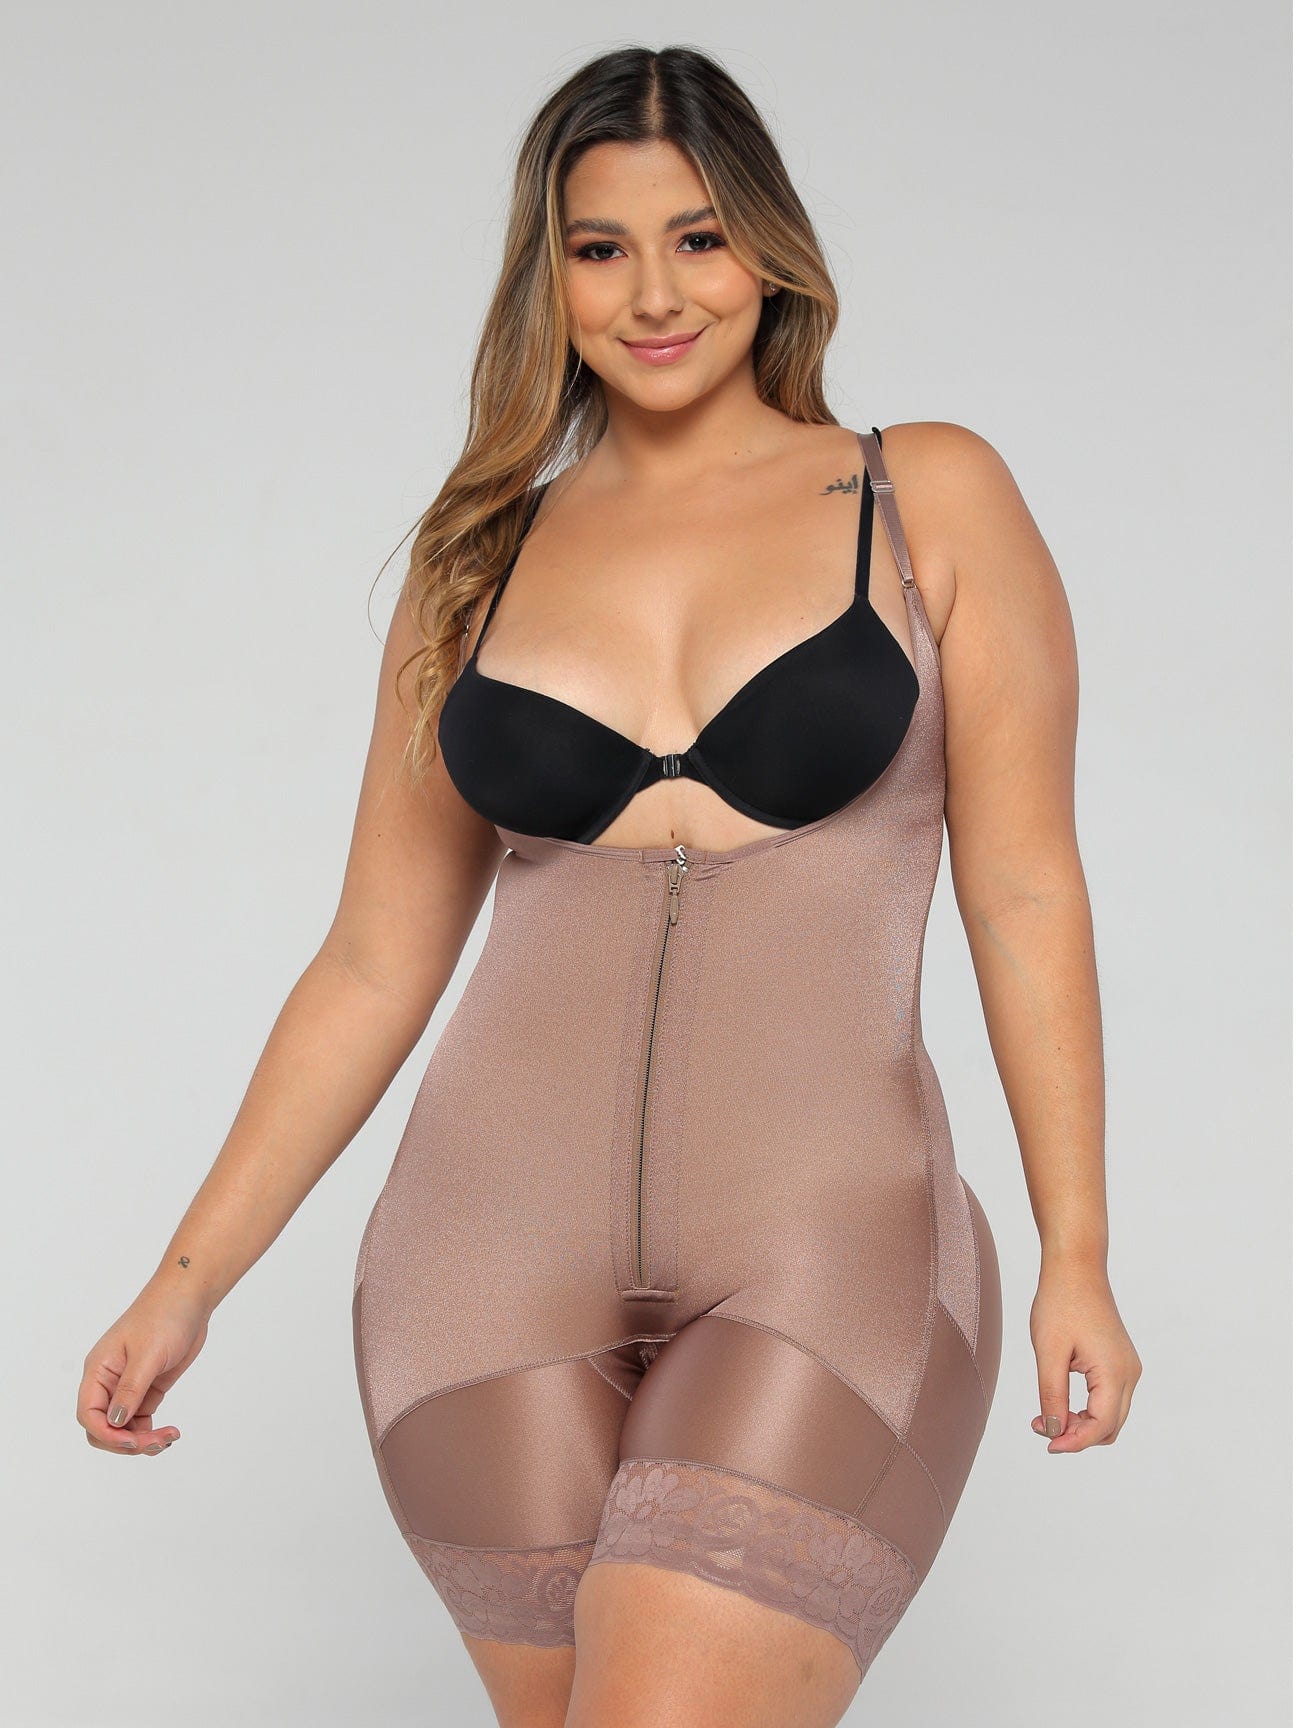 Snatched Body Luxe Faja with Zippers CB450